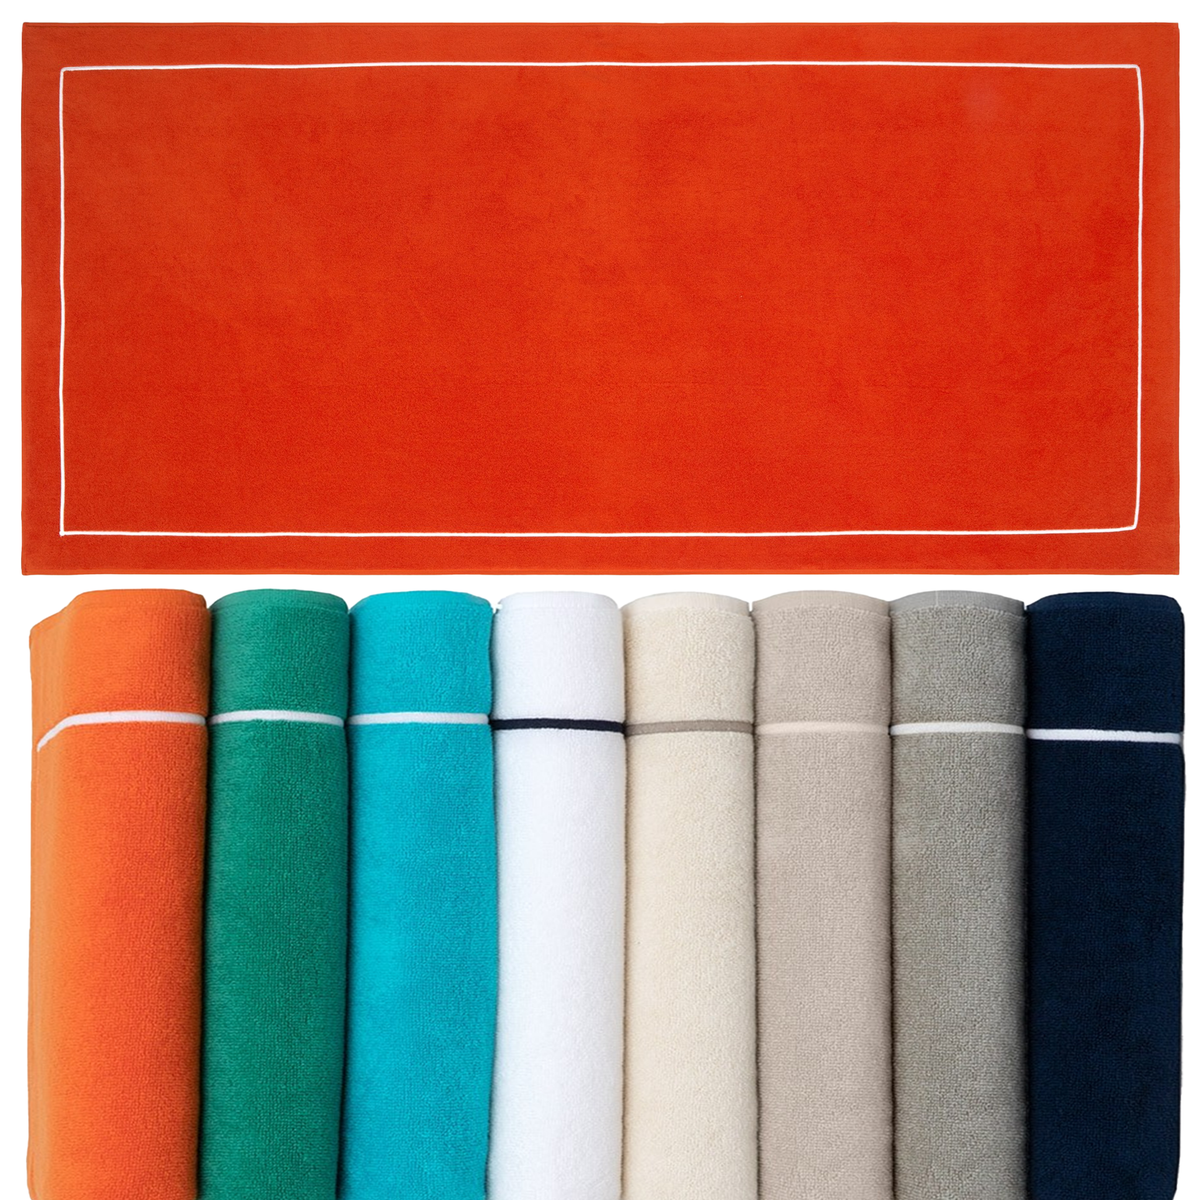 Yves Delorme Croisiere Beach Towels Oranger With Stack Colors